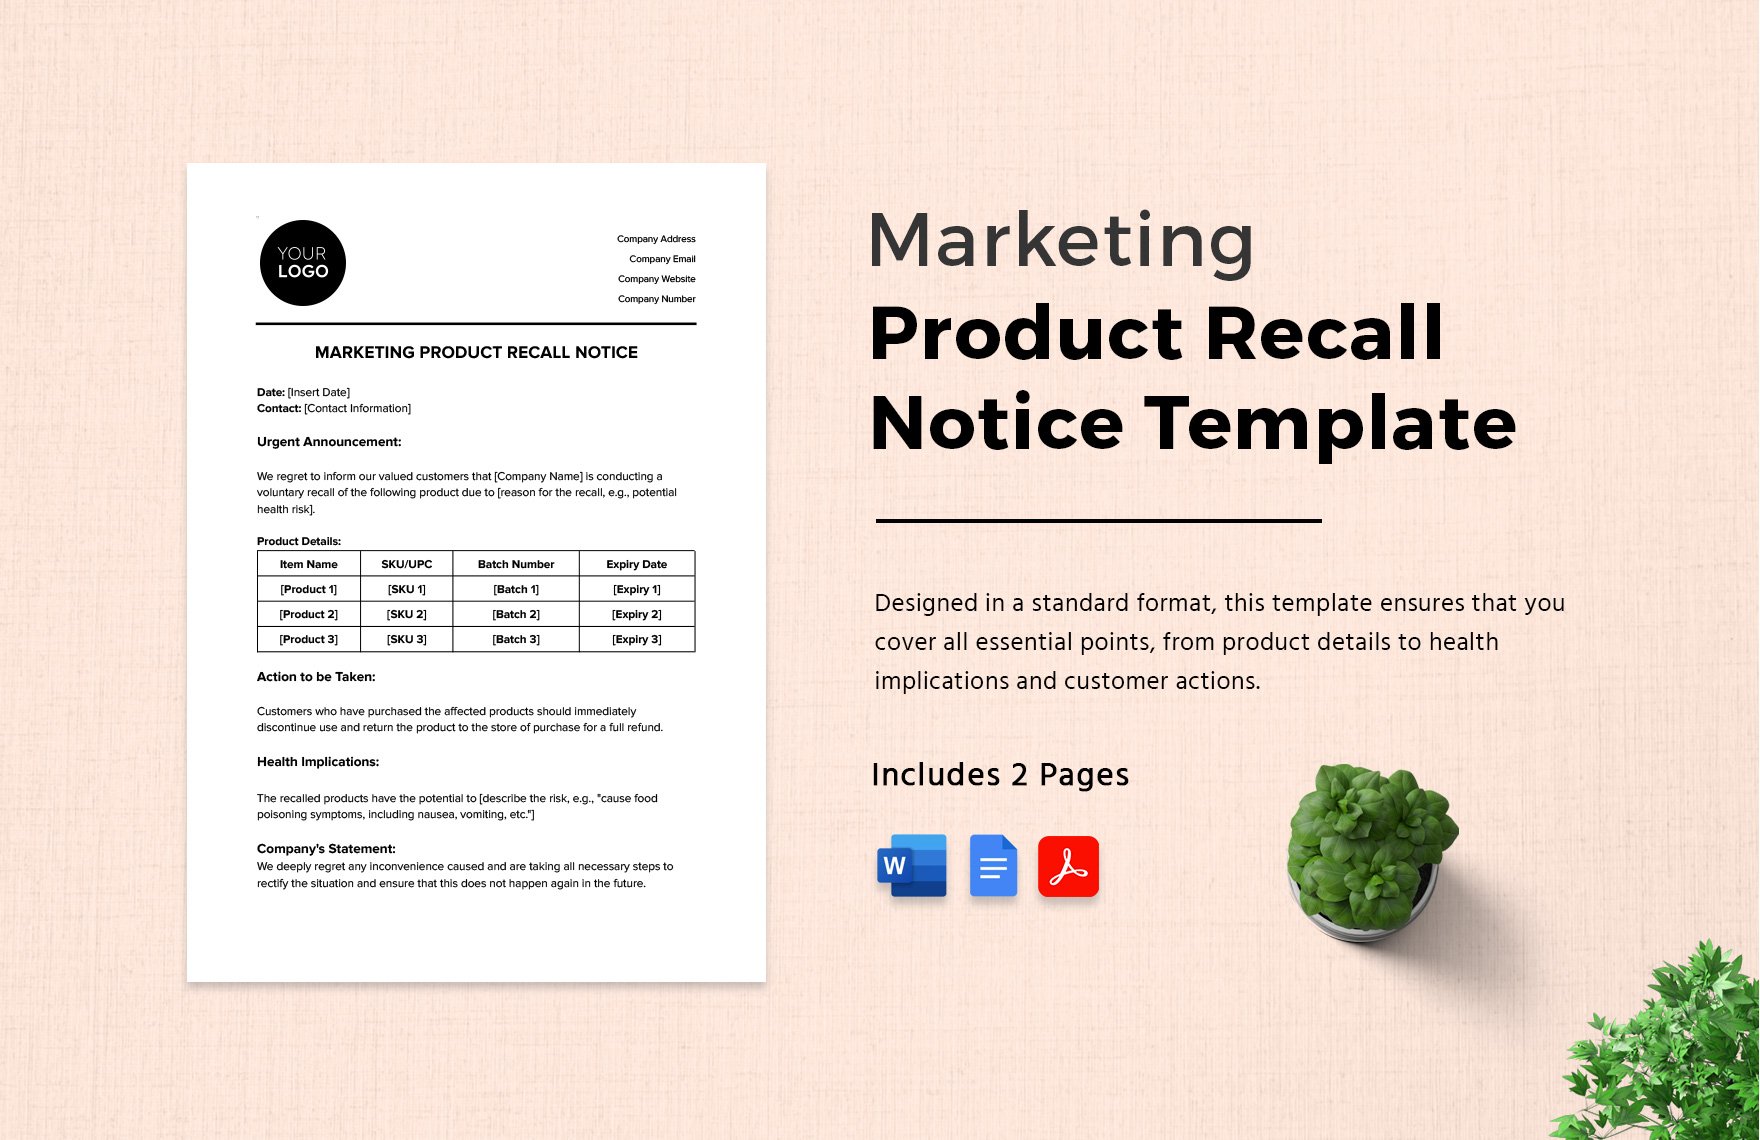 Marketing Product Recall Notice Template in Word, Google Docs, PDF